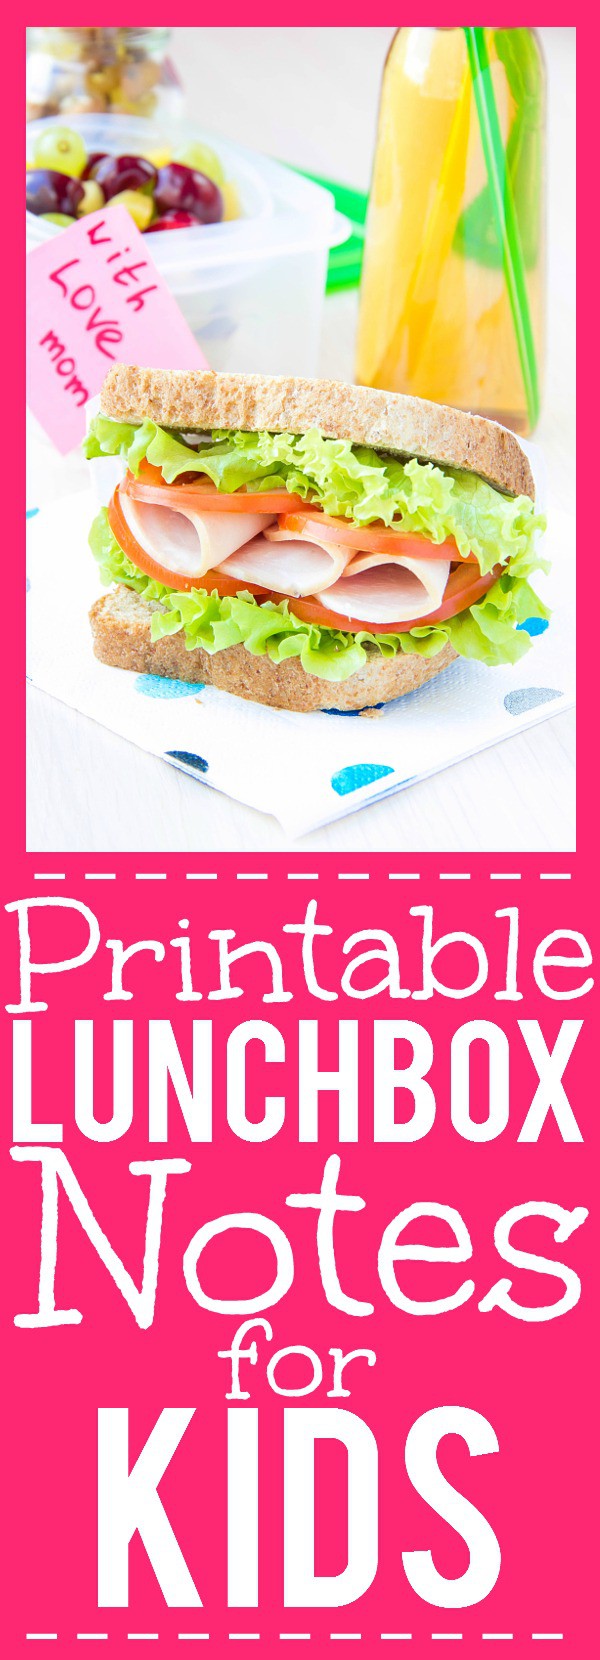 Free Printable Lunch Box Notes for Kids - Add a special, personal touch to your child's lunch to remind them you're thinking of them with these free Printable Lunchbox Notes for Kids.